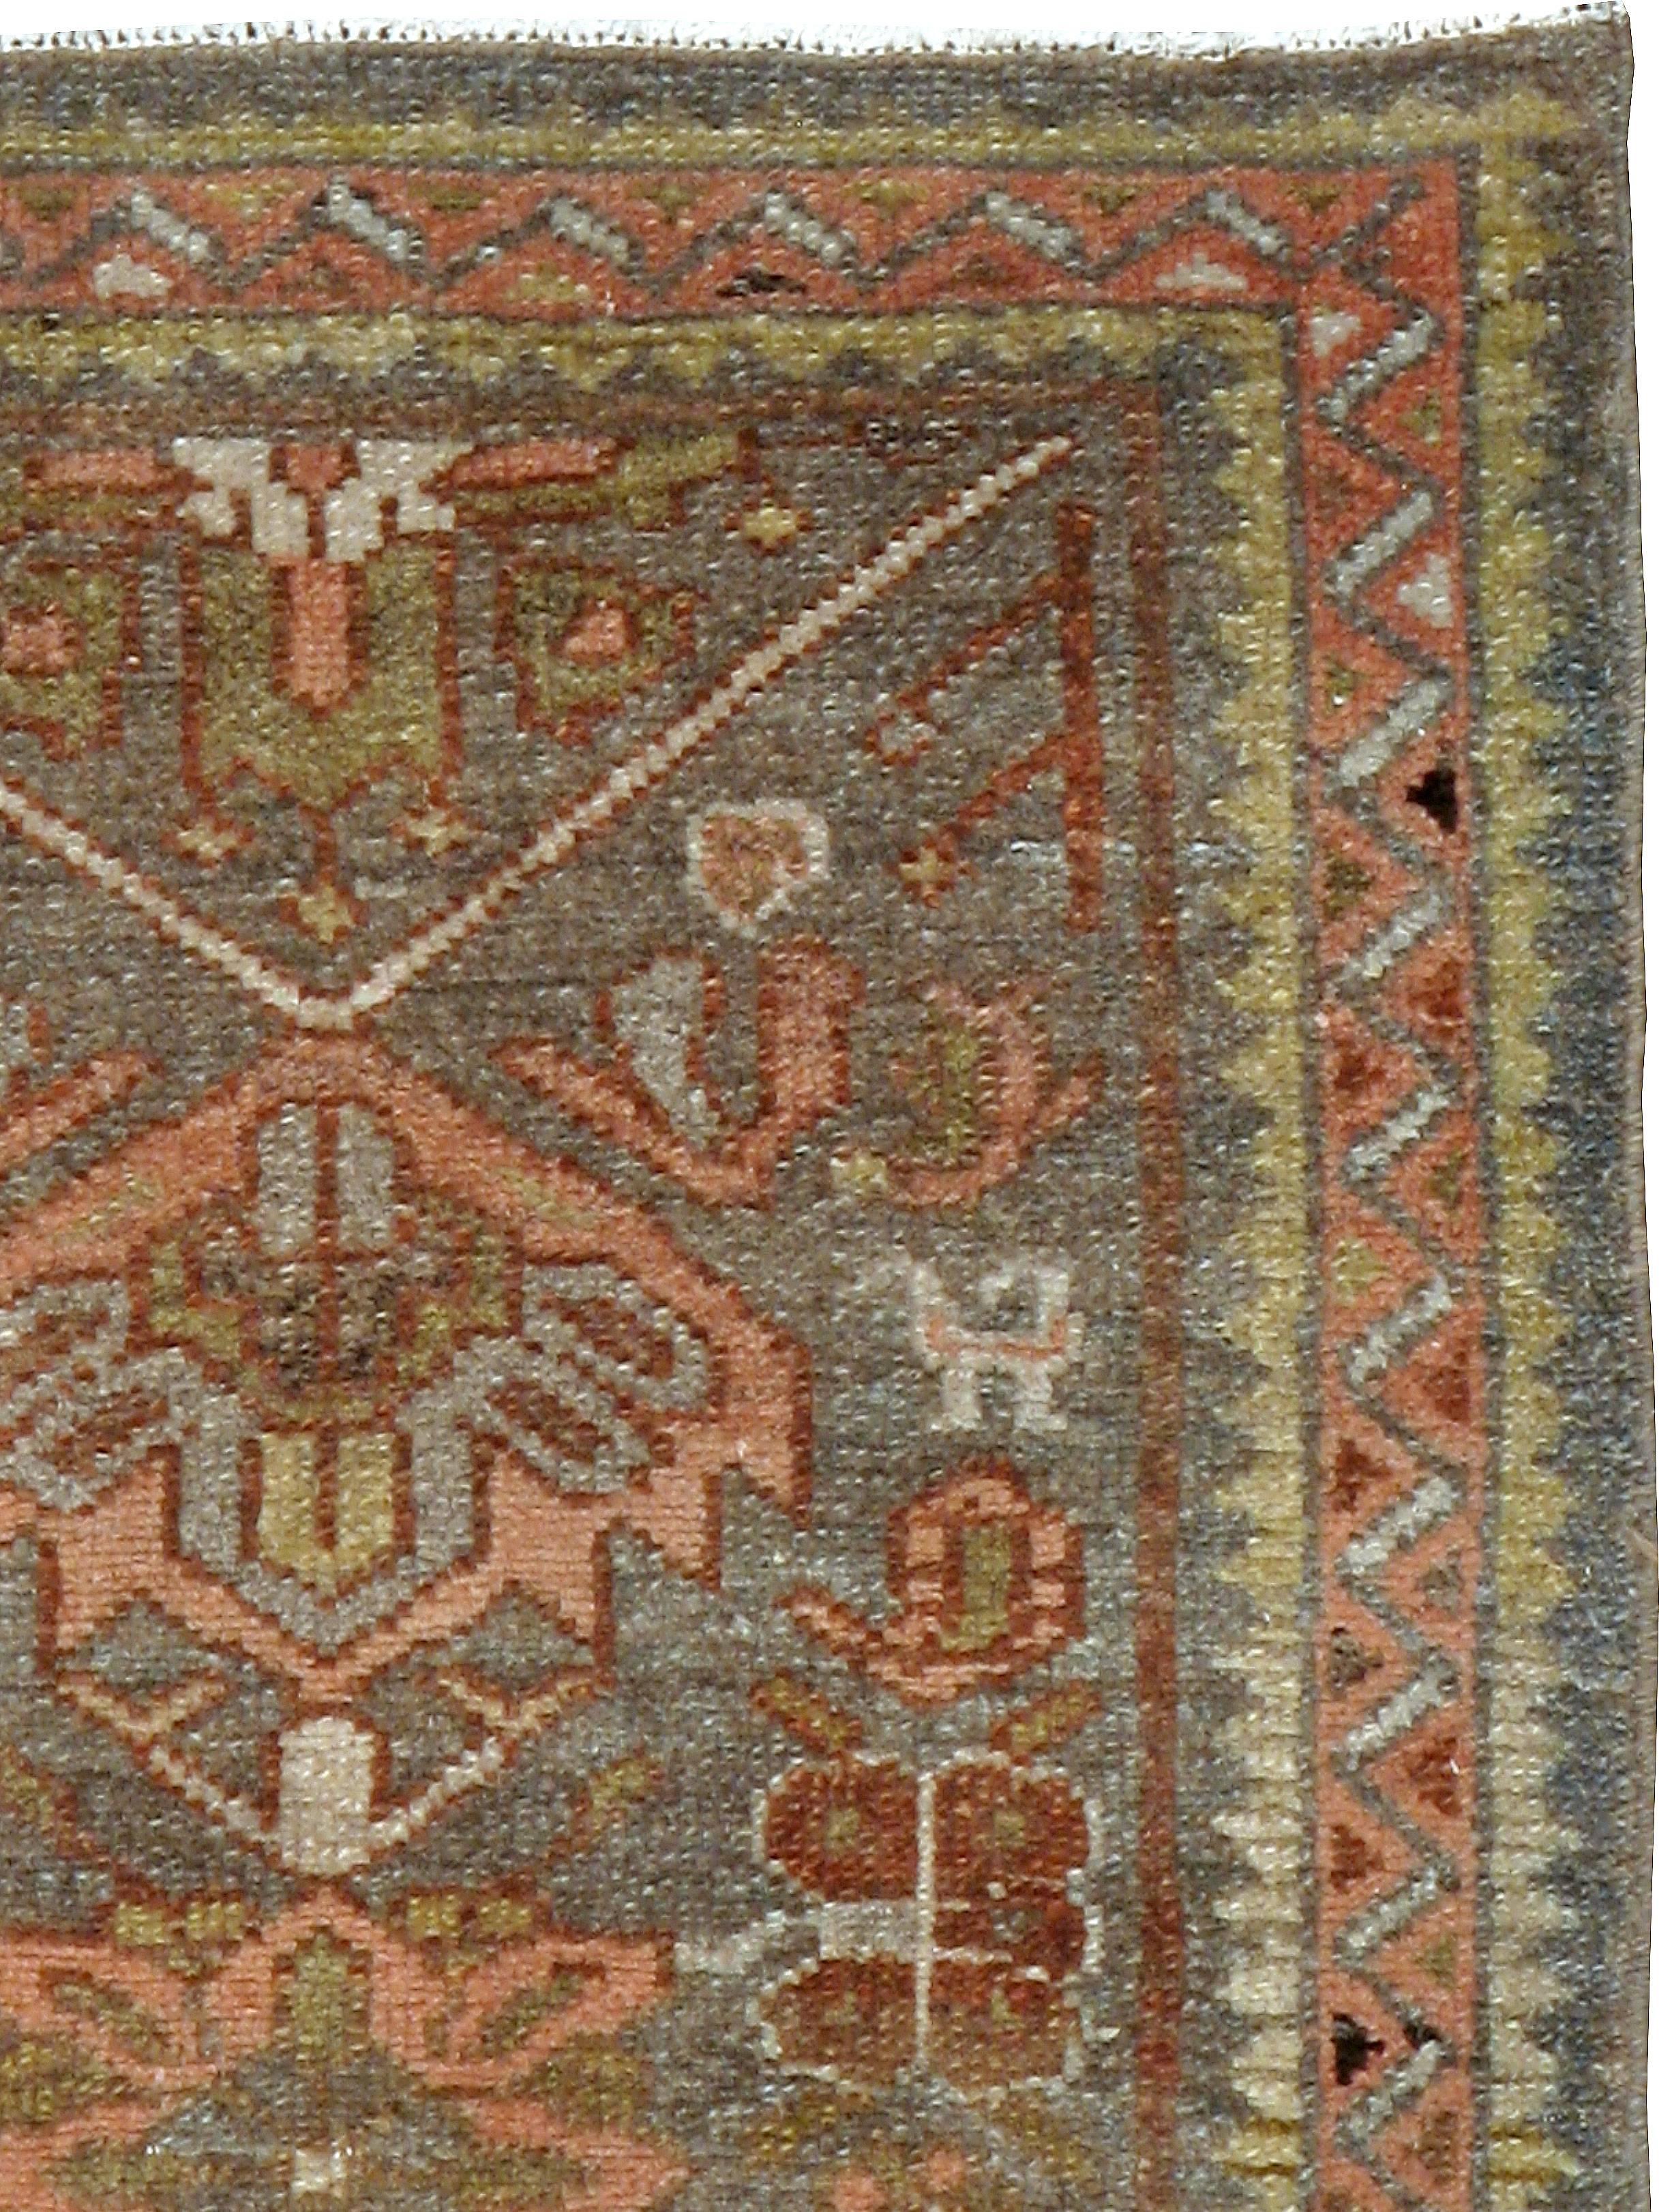 A first quarter of the 20th century Persian Malayer rug.